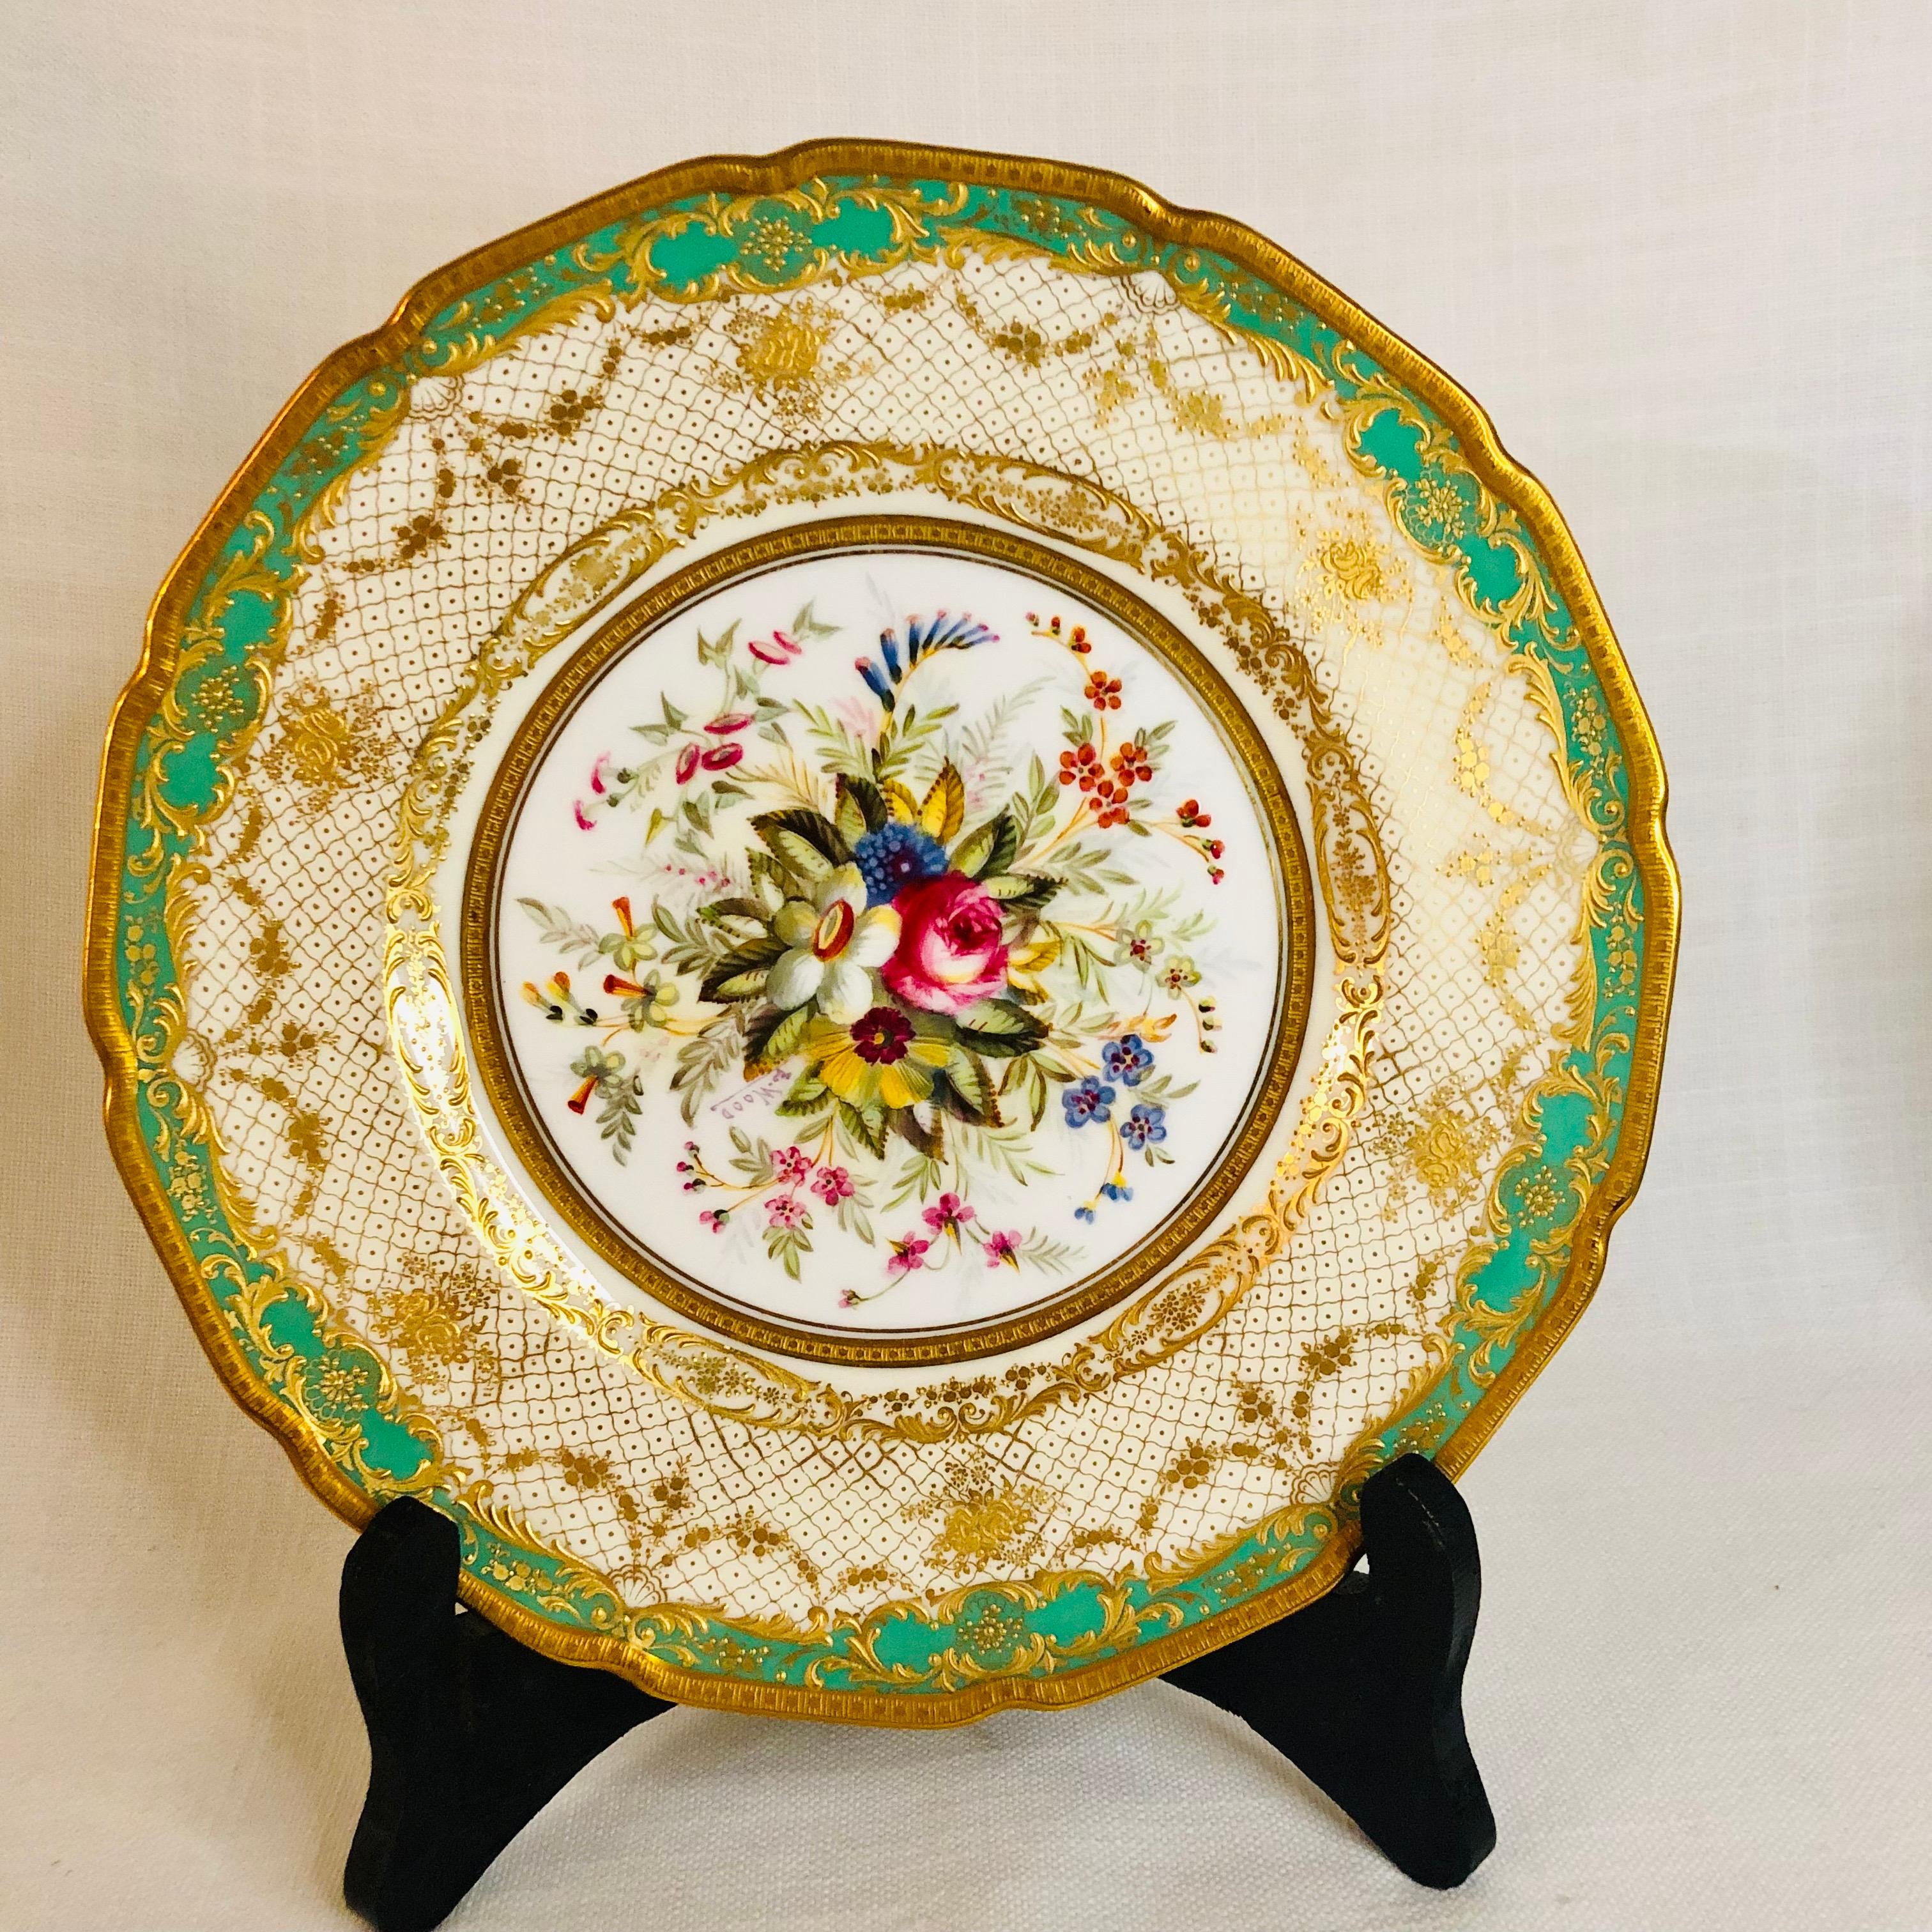 how much is royal doulton china worth